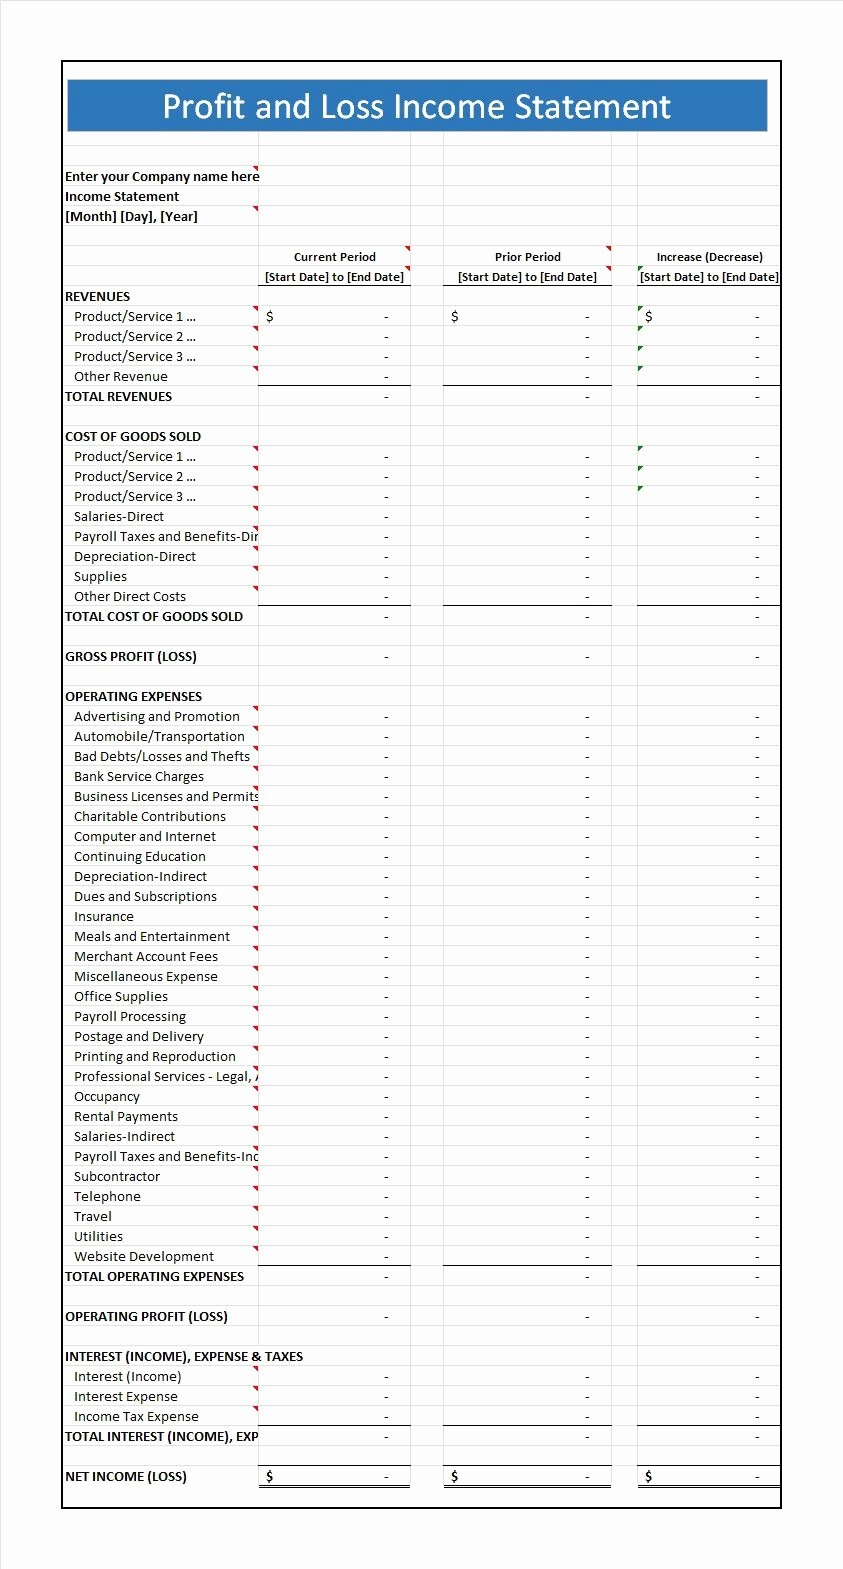 Profit and Loss Statement Examples Elegant 35 Profit and Loss Statement Templates &amp; forms